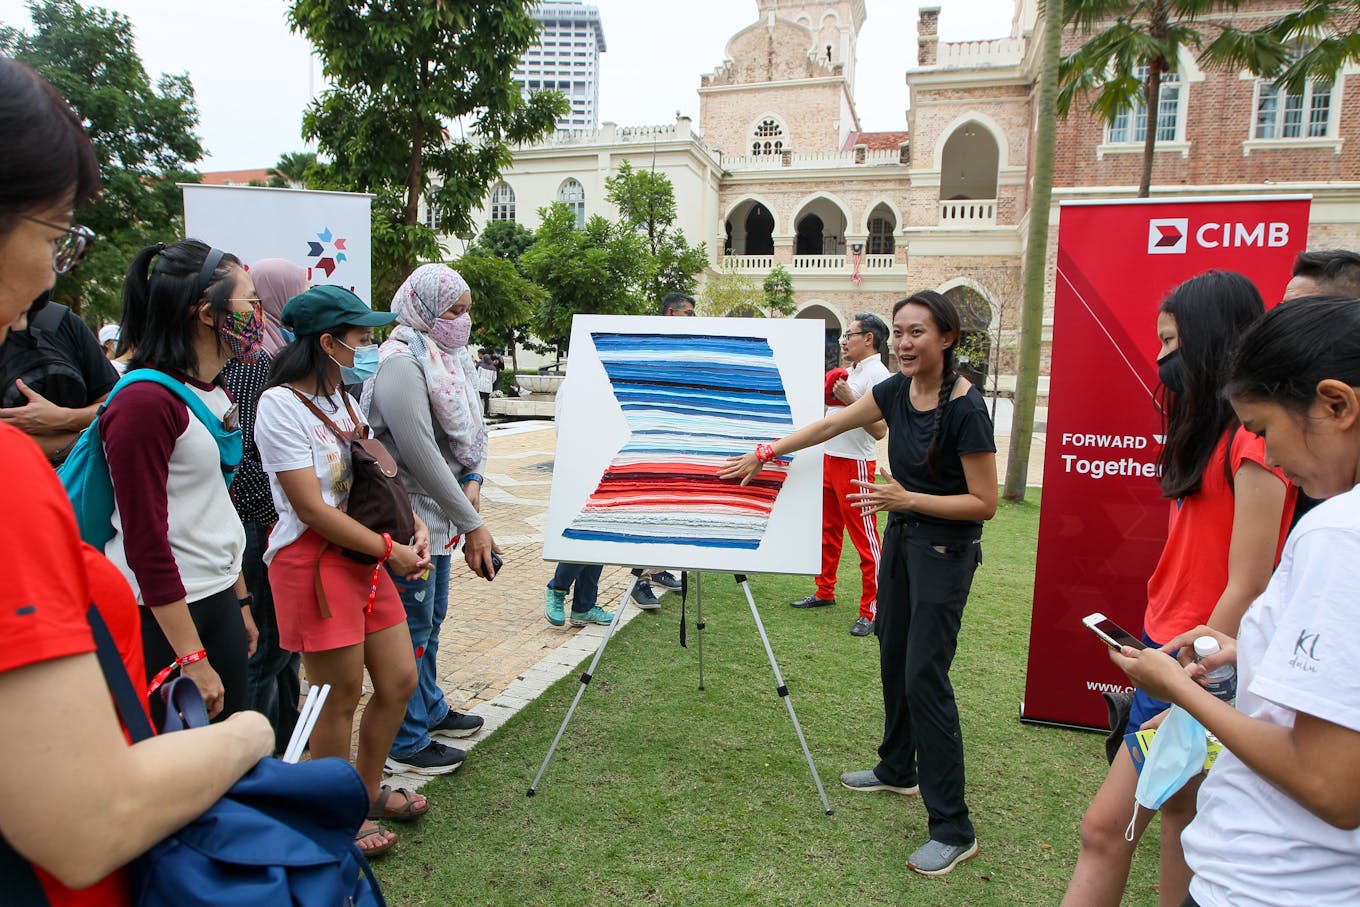 Luanne Sieh, CIMB's head of sustainability, explaining the 'warming stripe' history of global warming.